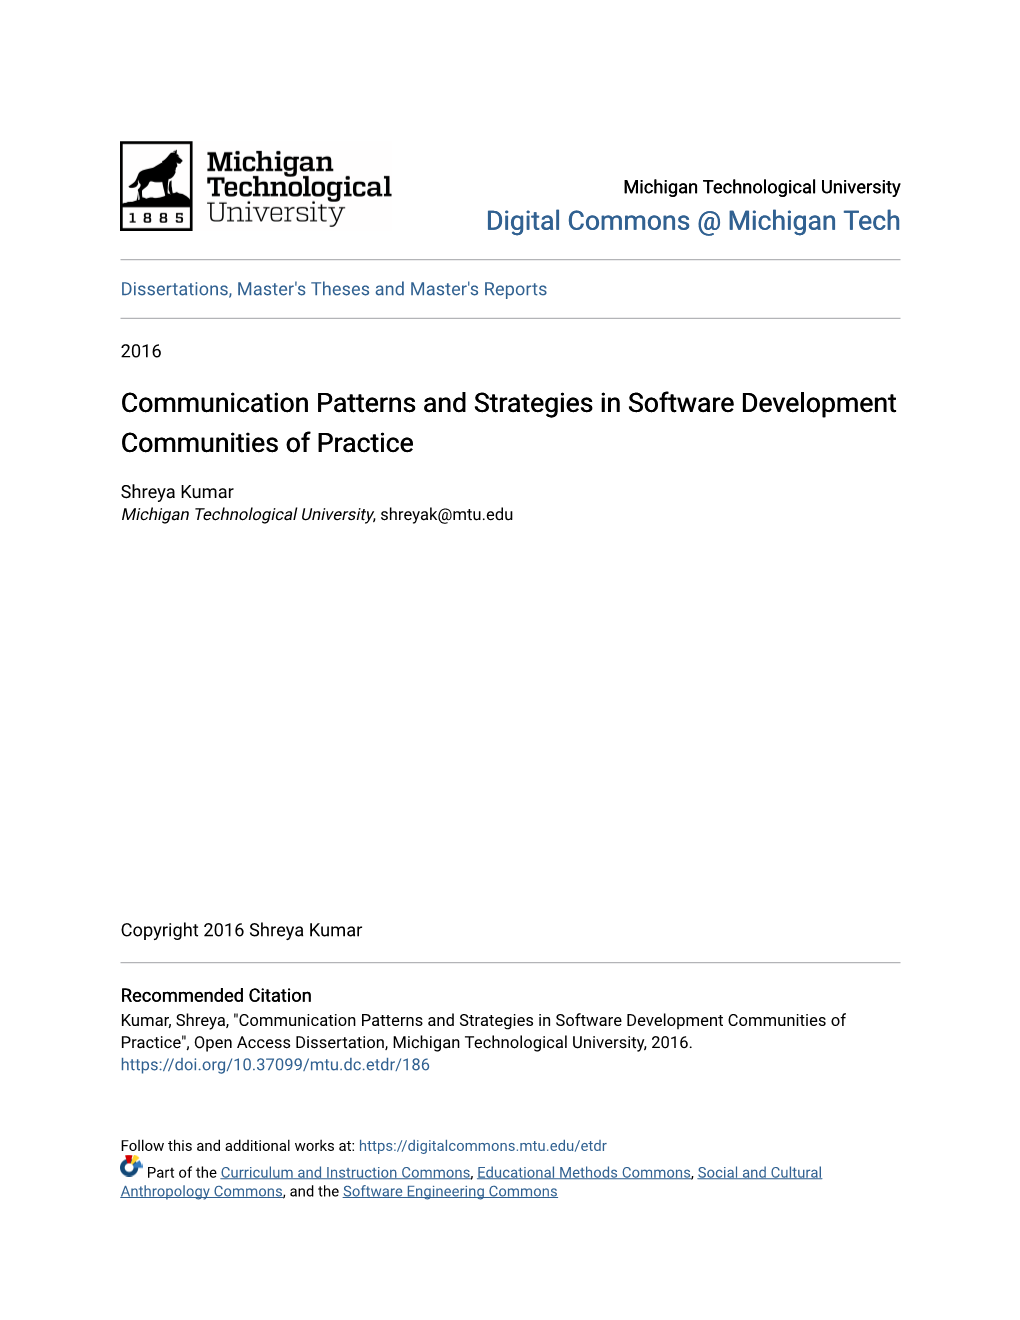 Communication Patterns and Strategies in Software Development Communities of Practice